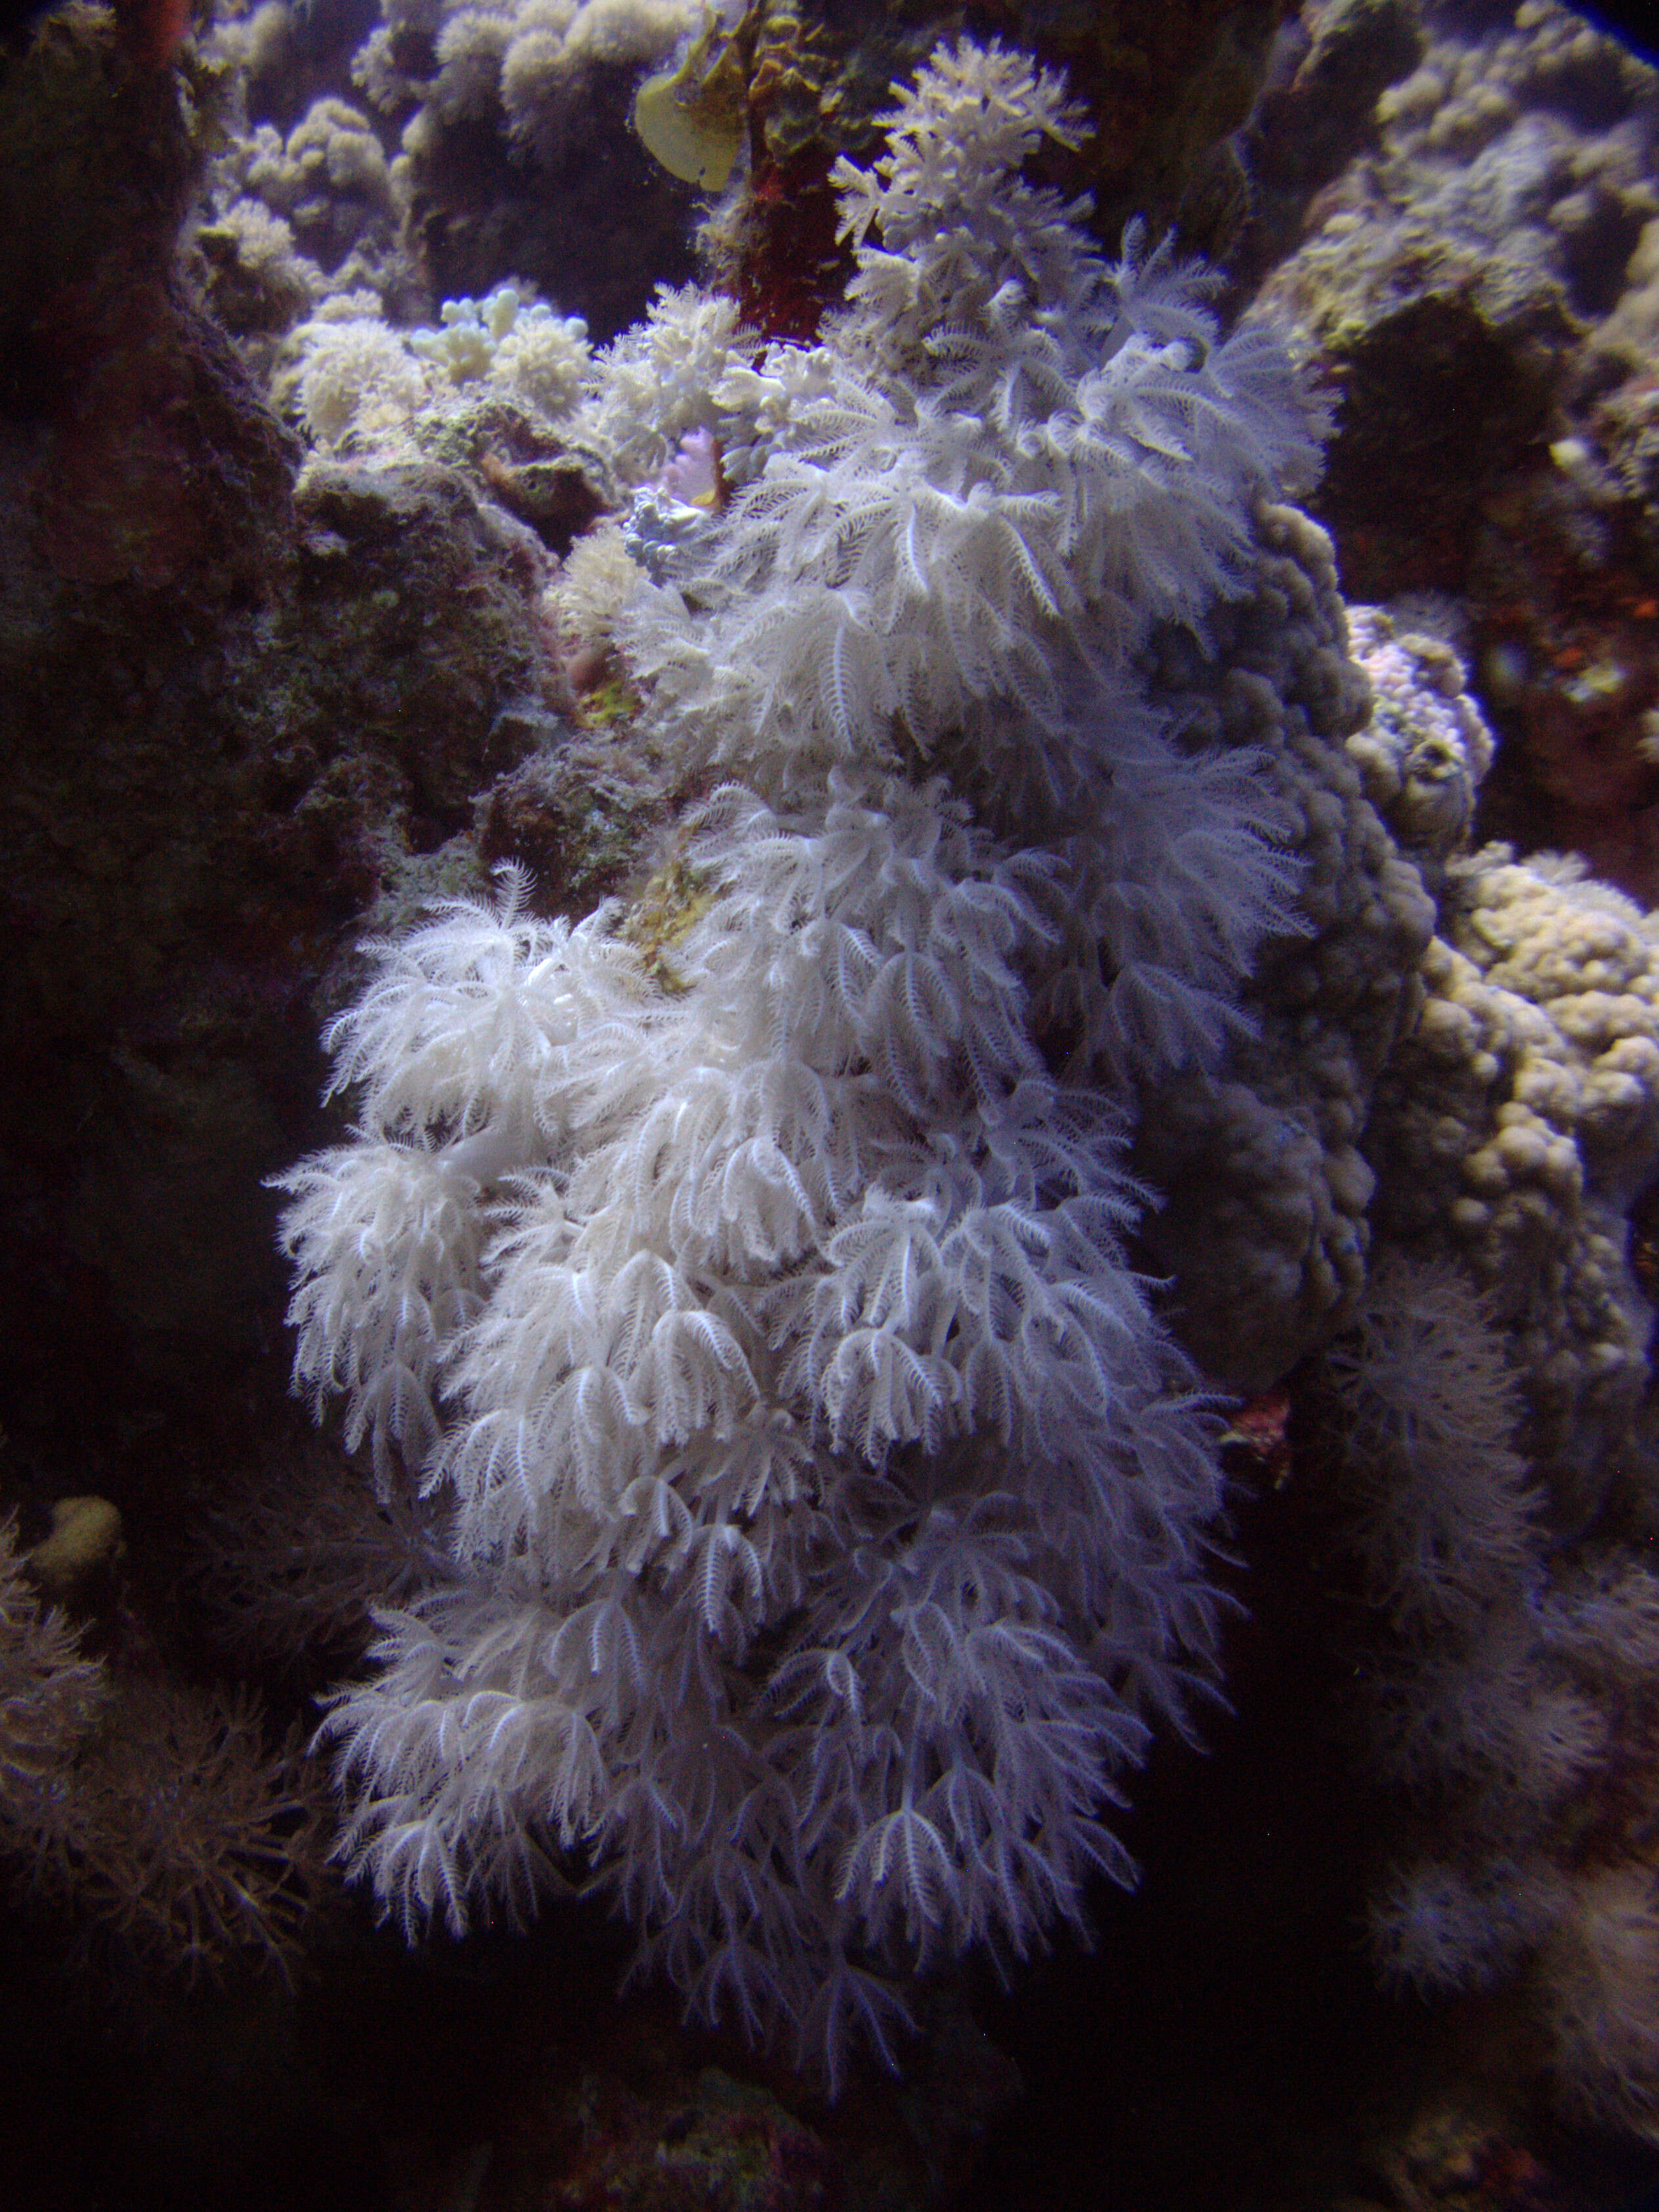 Image of soft corals